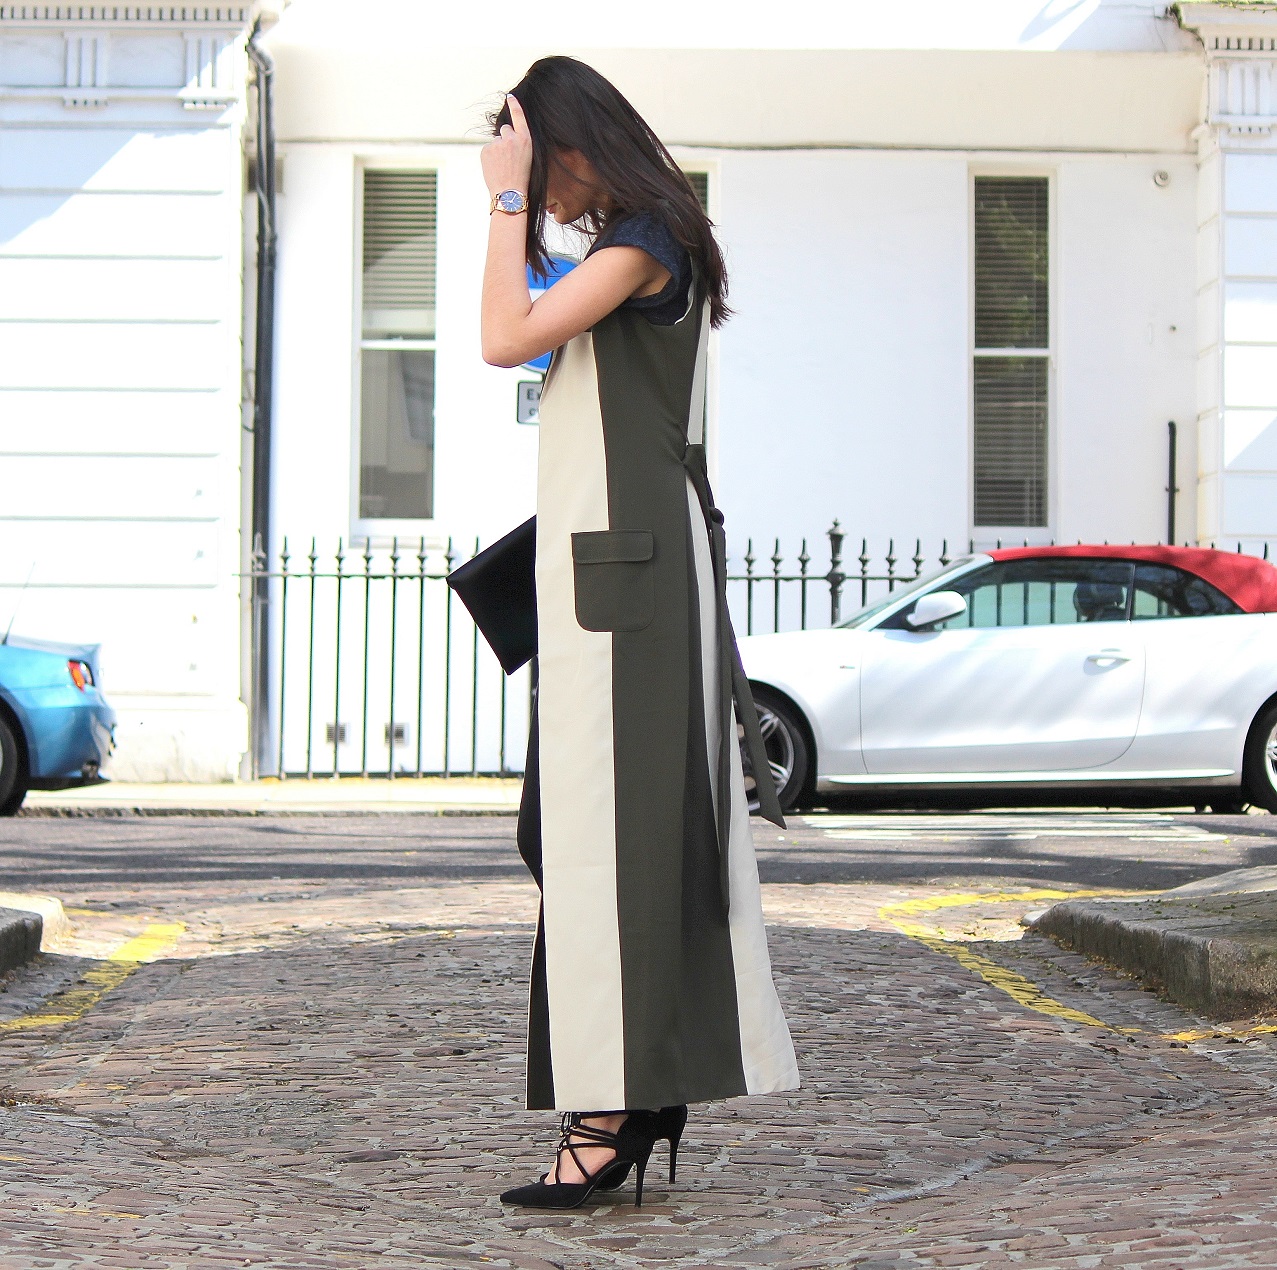 peexo fashion blogger wearing maxi trench and black topshop leigh jeans and black tshirt and lace up heels in spring